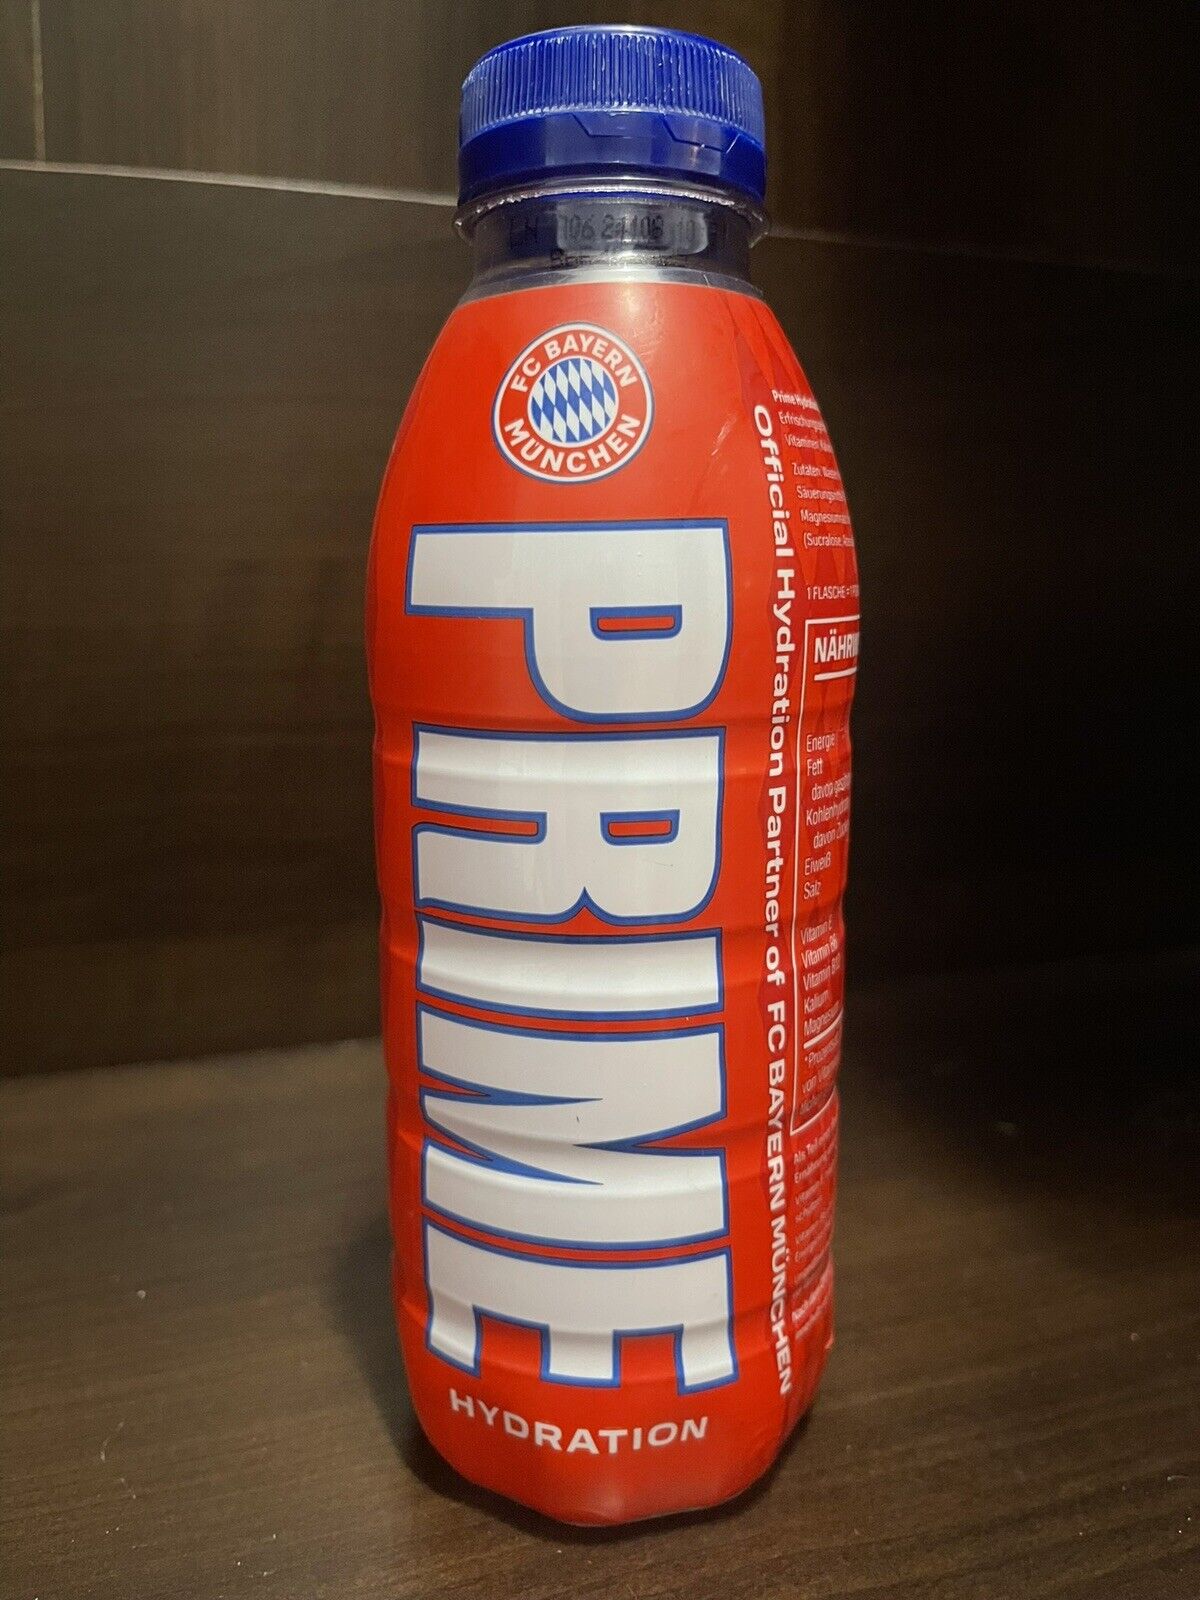 RARE Prime FC Bayern Munchen Goalberry Mixed Berry Flavored 1 Bottle Sealed